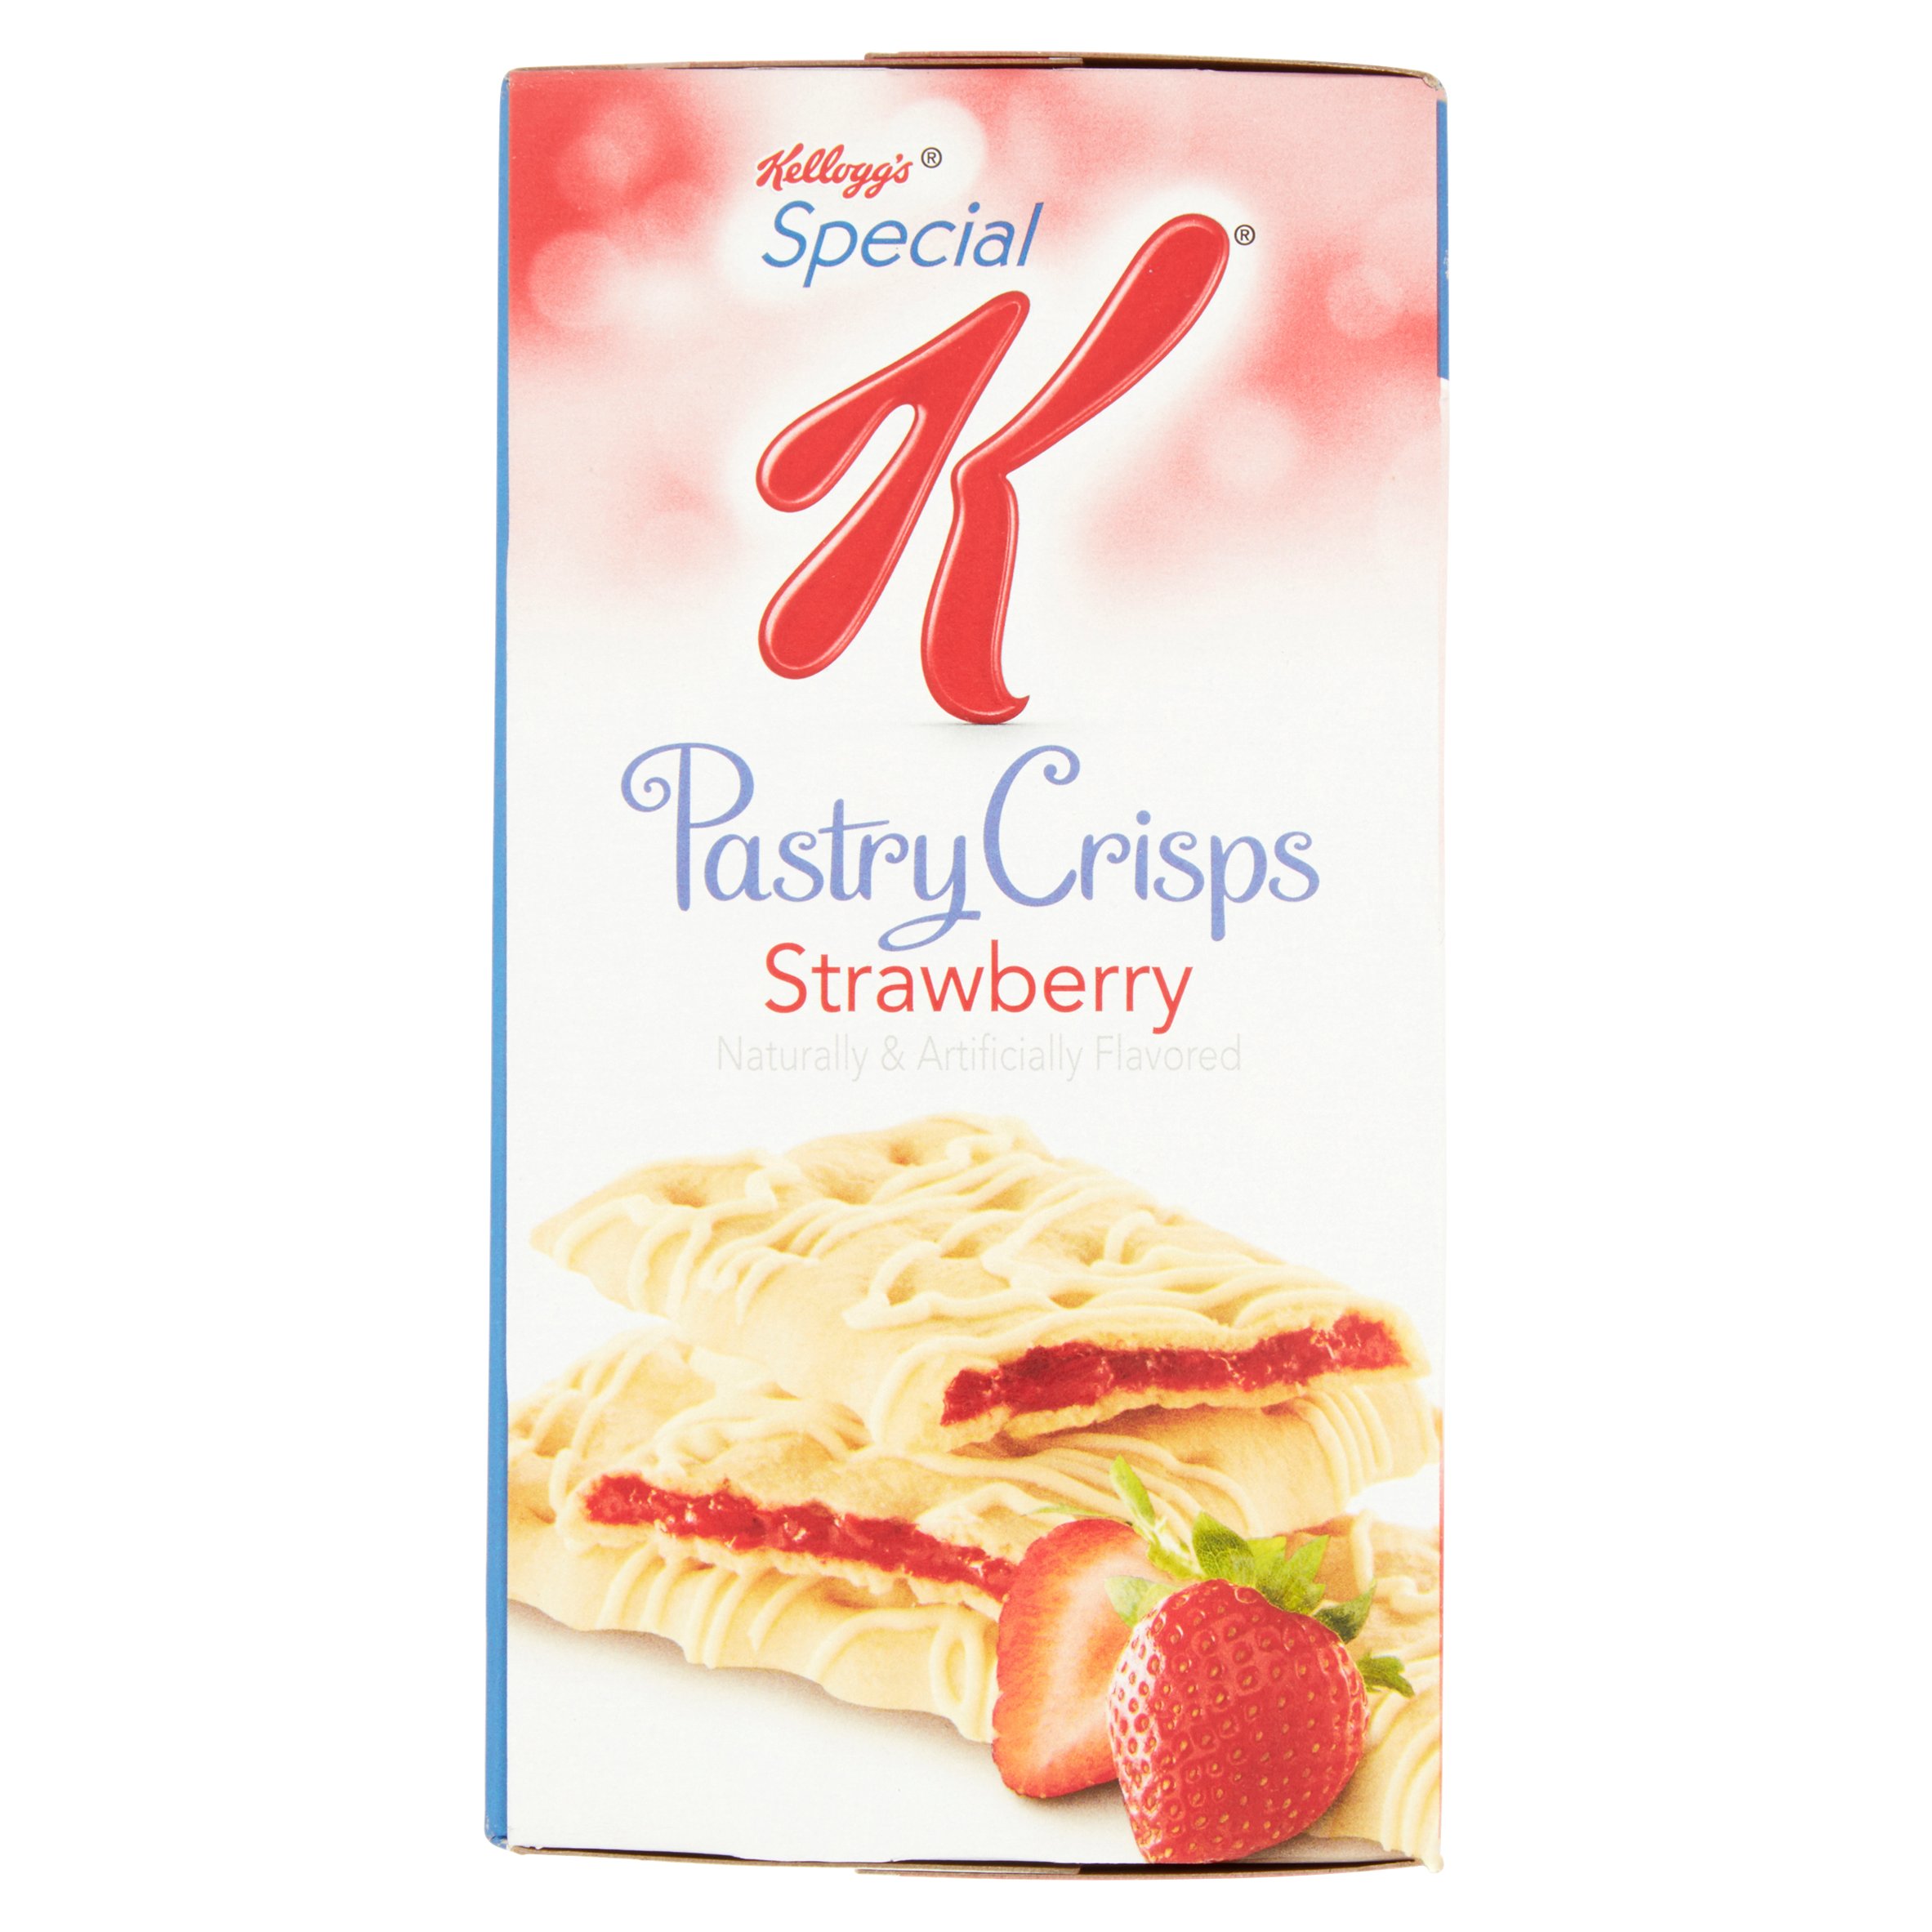 Kellogg's Special K Strawberry Pastry Crisps, 0.88 oz, 15 count - image 3 of 5